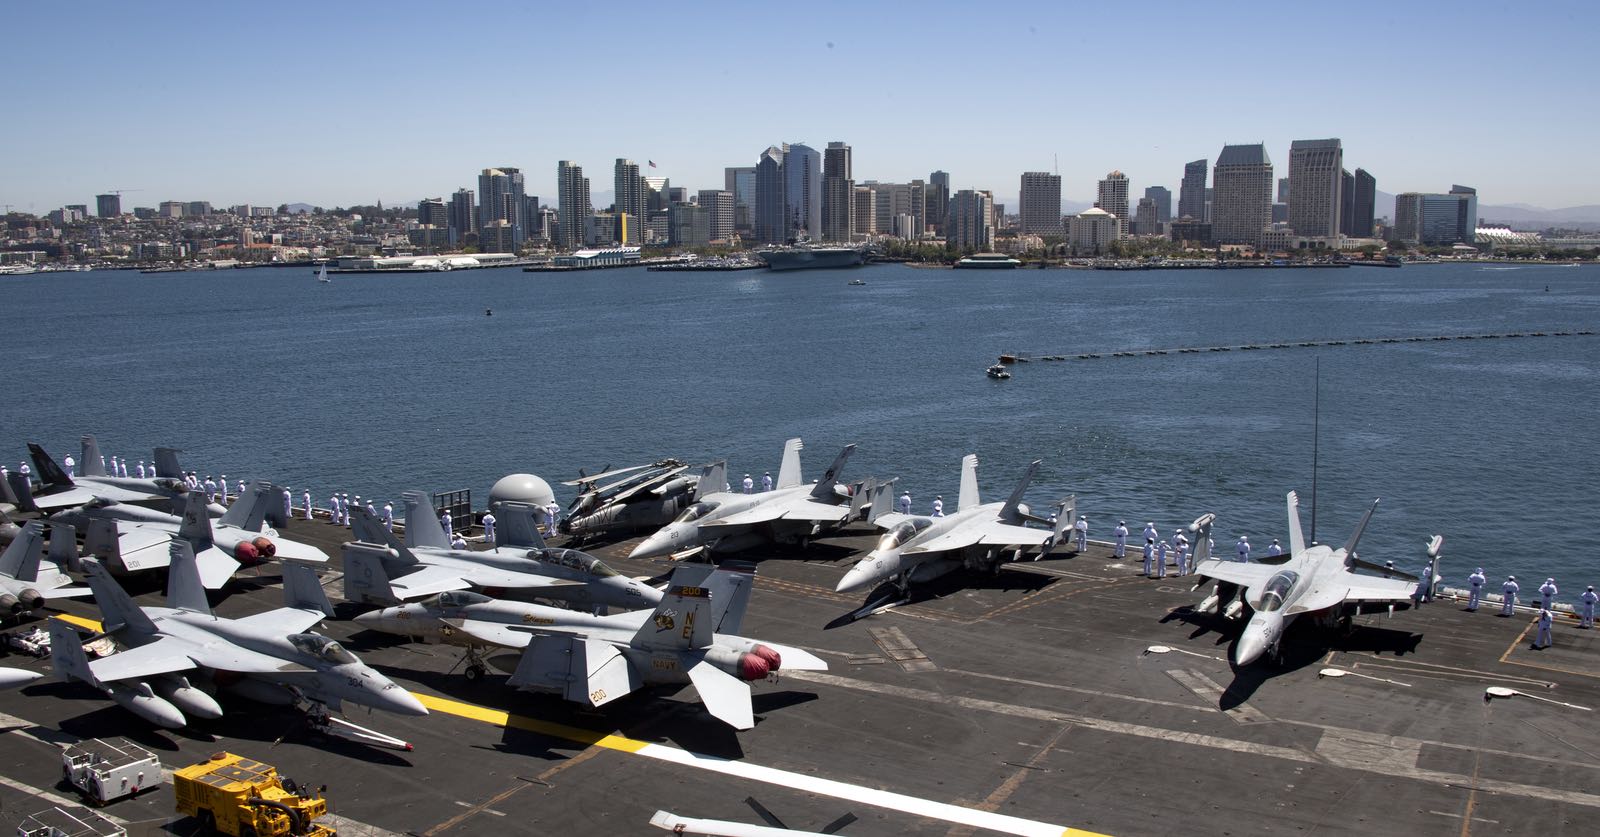 A real top gun with planes aboard an aircraft carrier and the San Diego skyline in the background.